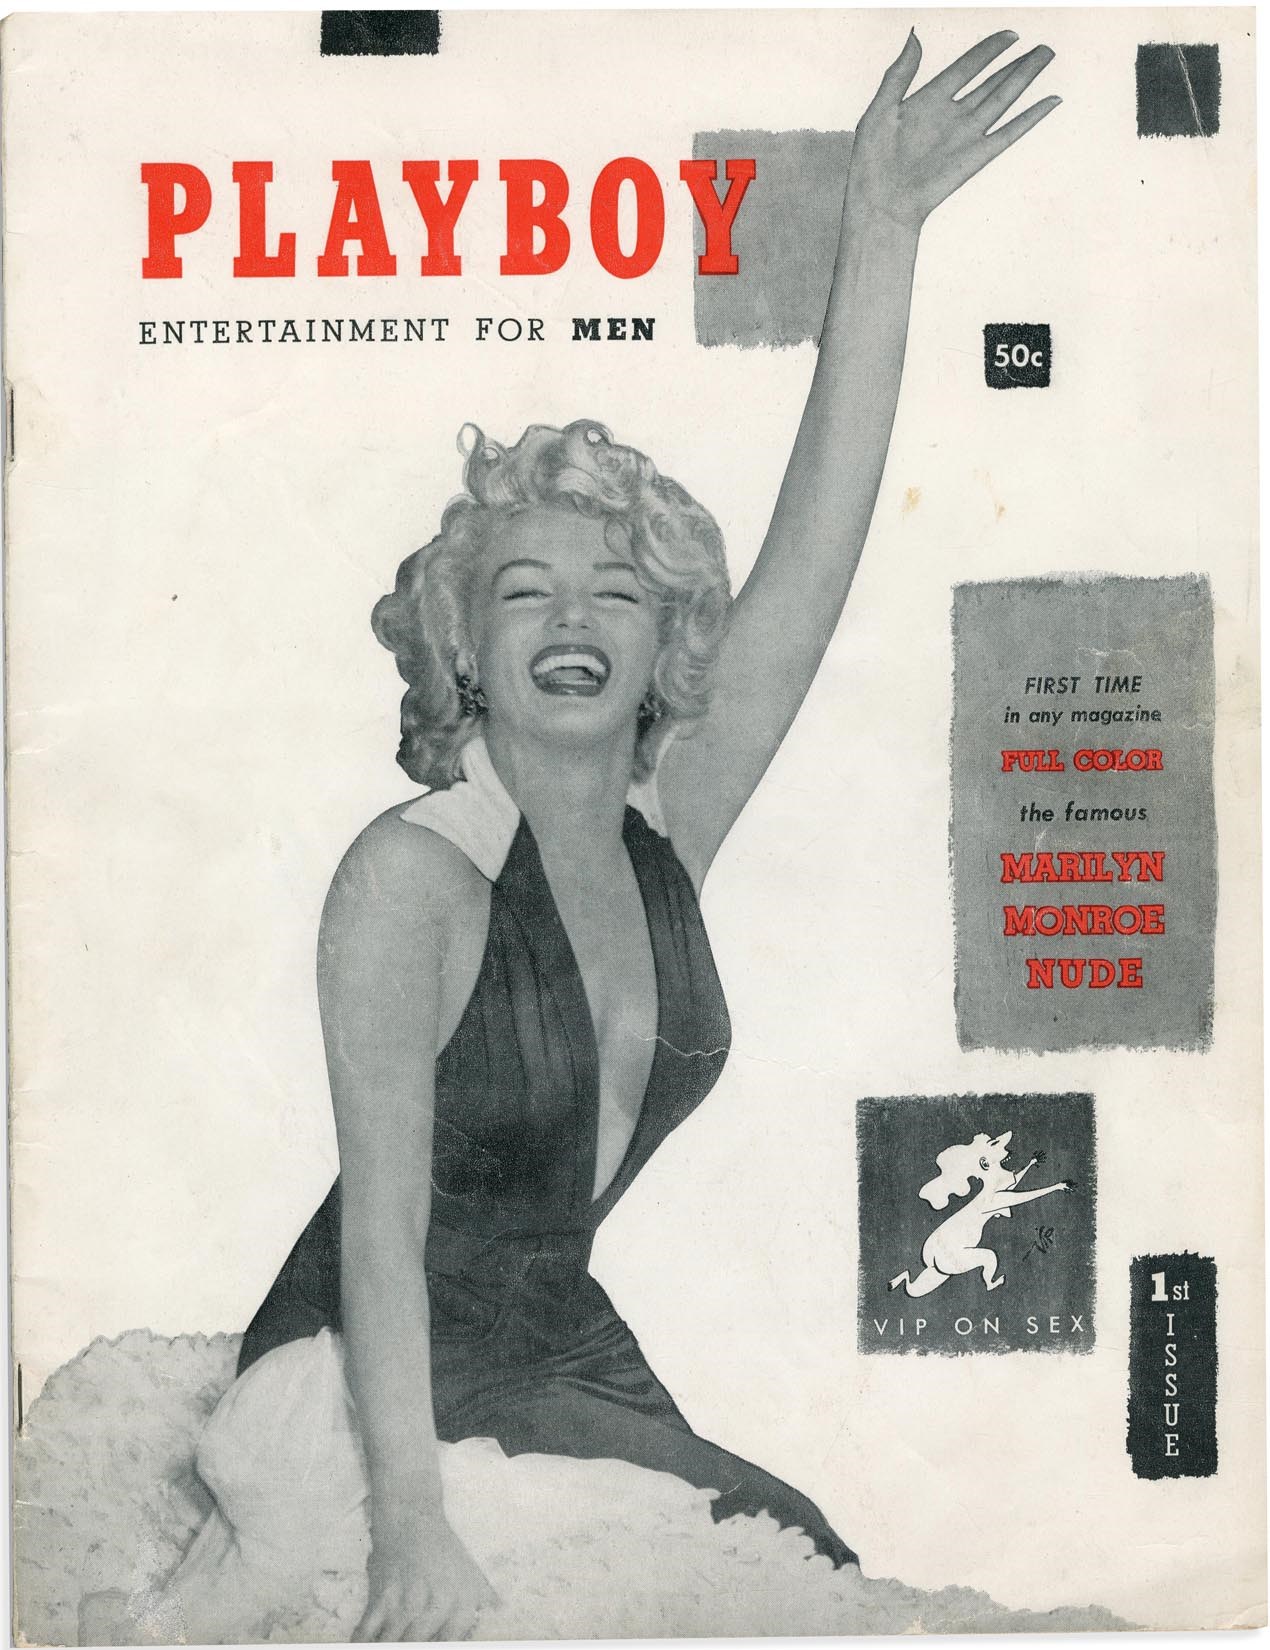 Rock And Pop Culture - Playboy #1 with Marilyn Monroe Cover